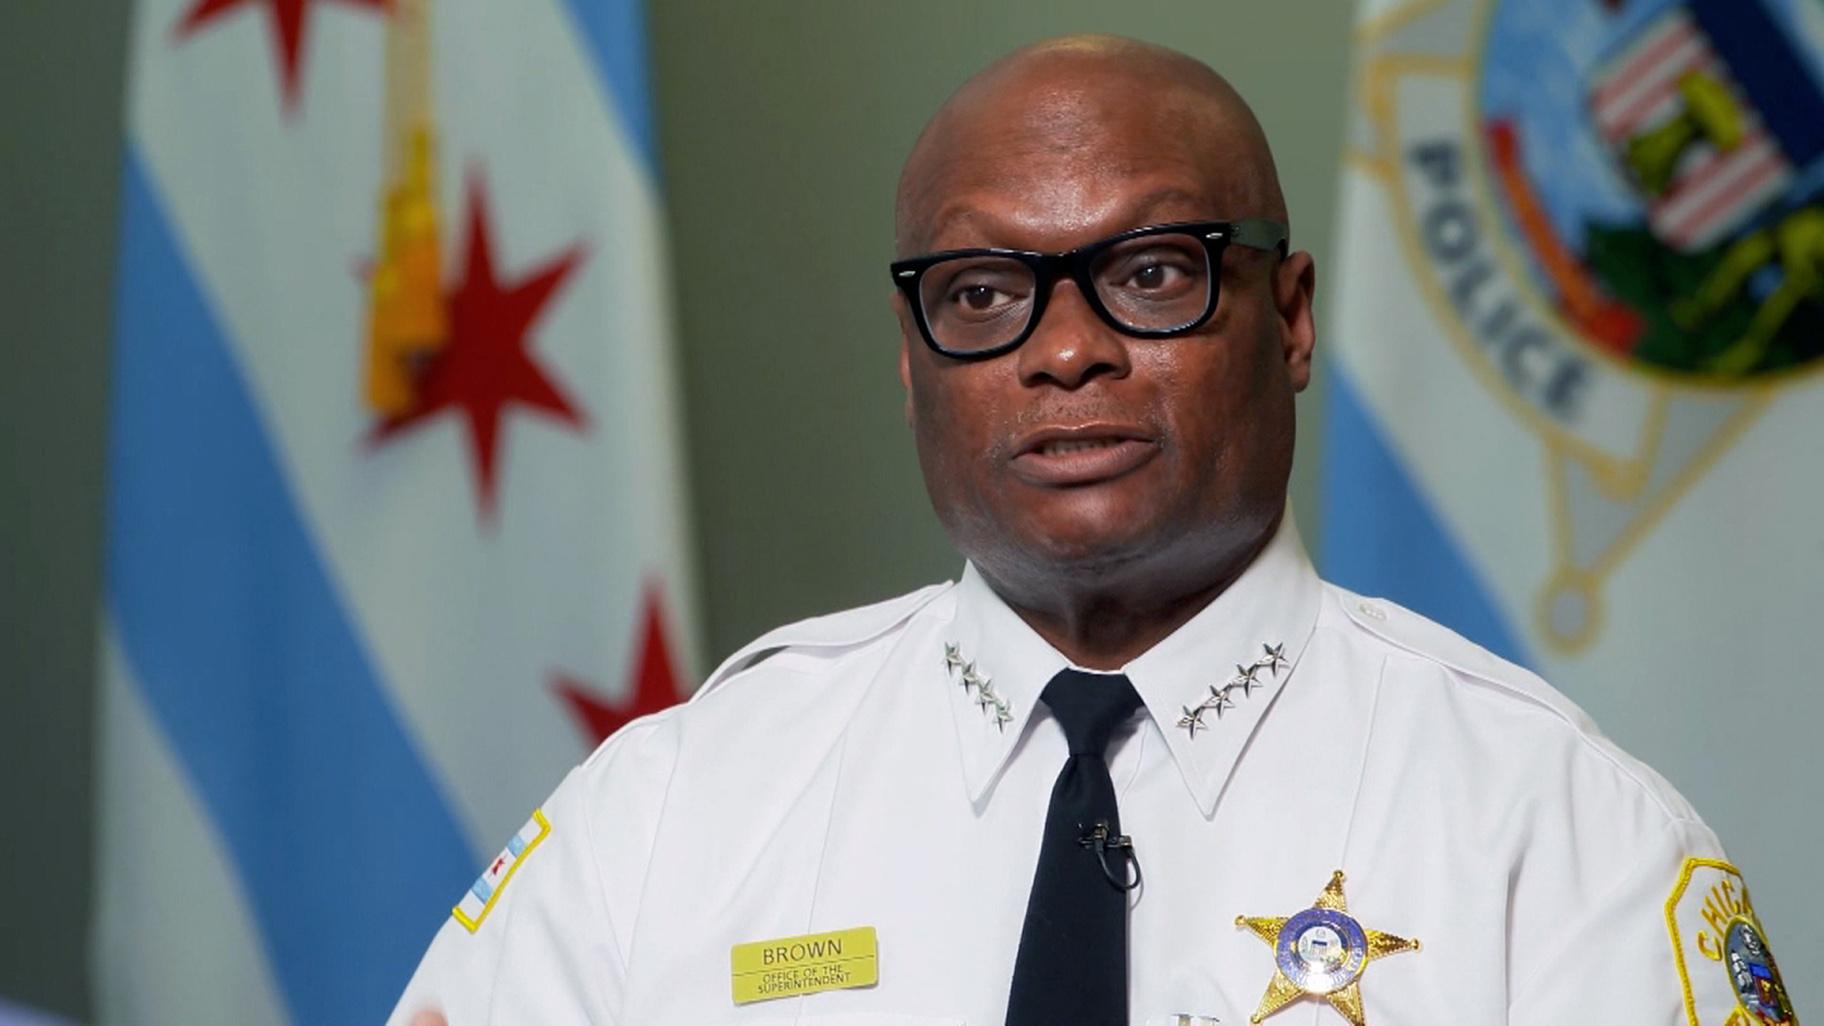 David Brown is superintendent of the Chicago Police Department, which has a new foot pursuit policy in the wake of high-profile and controversial police shooting deaths. (Leonel Mendez / CNN)